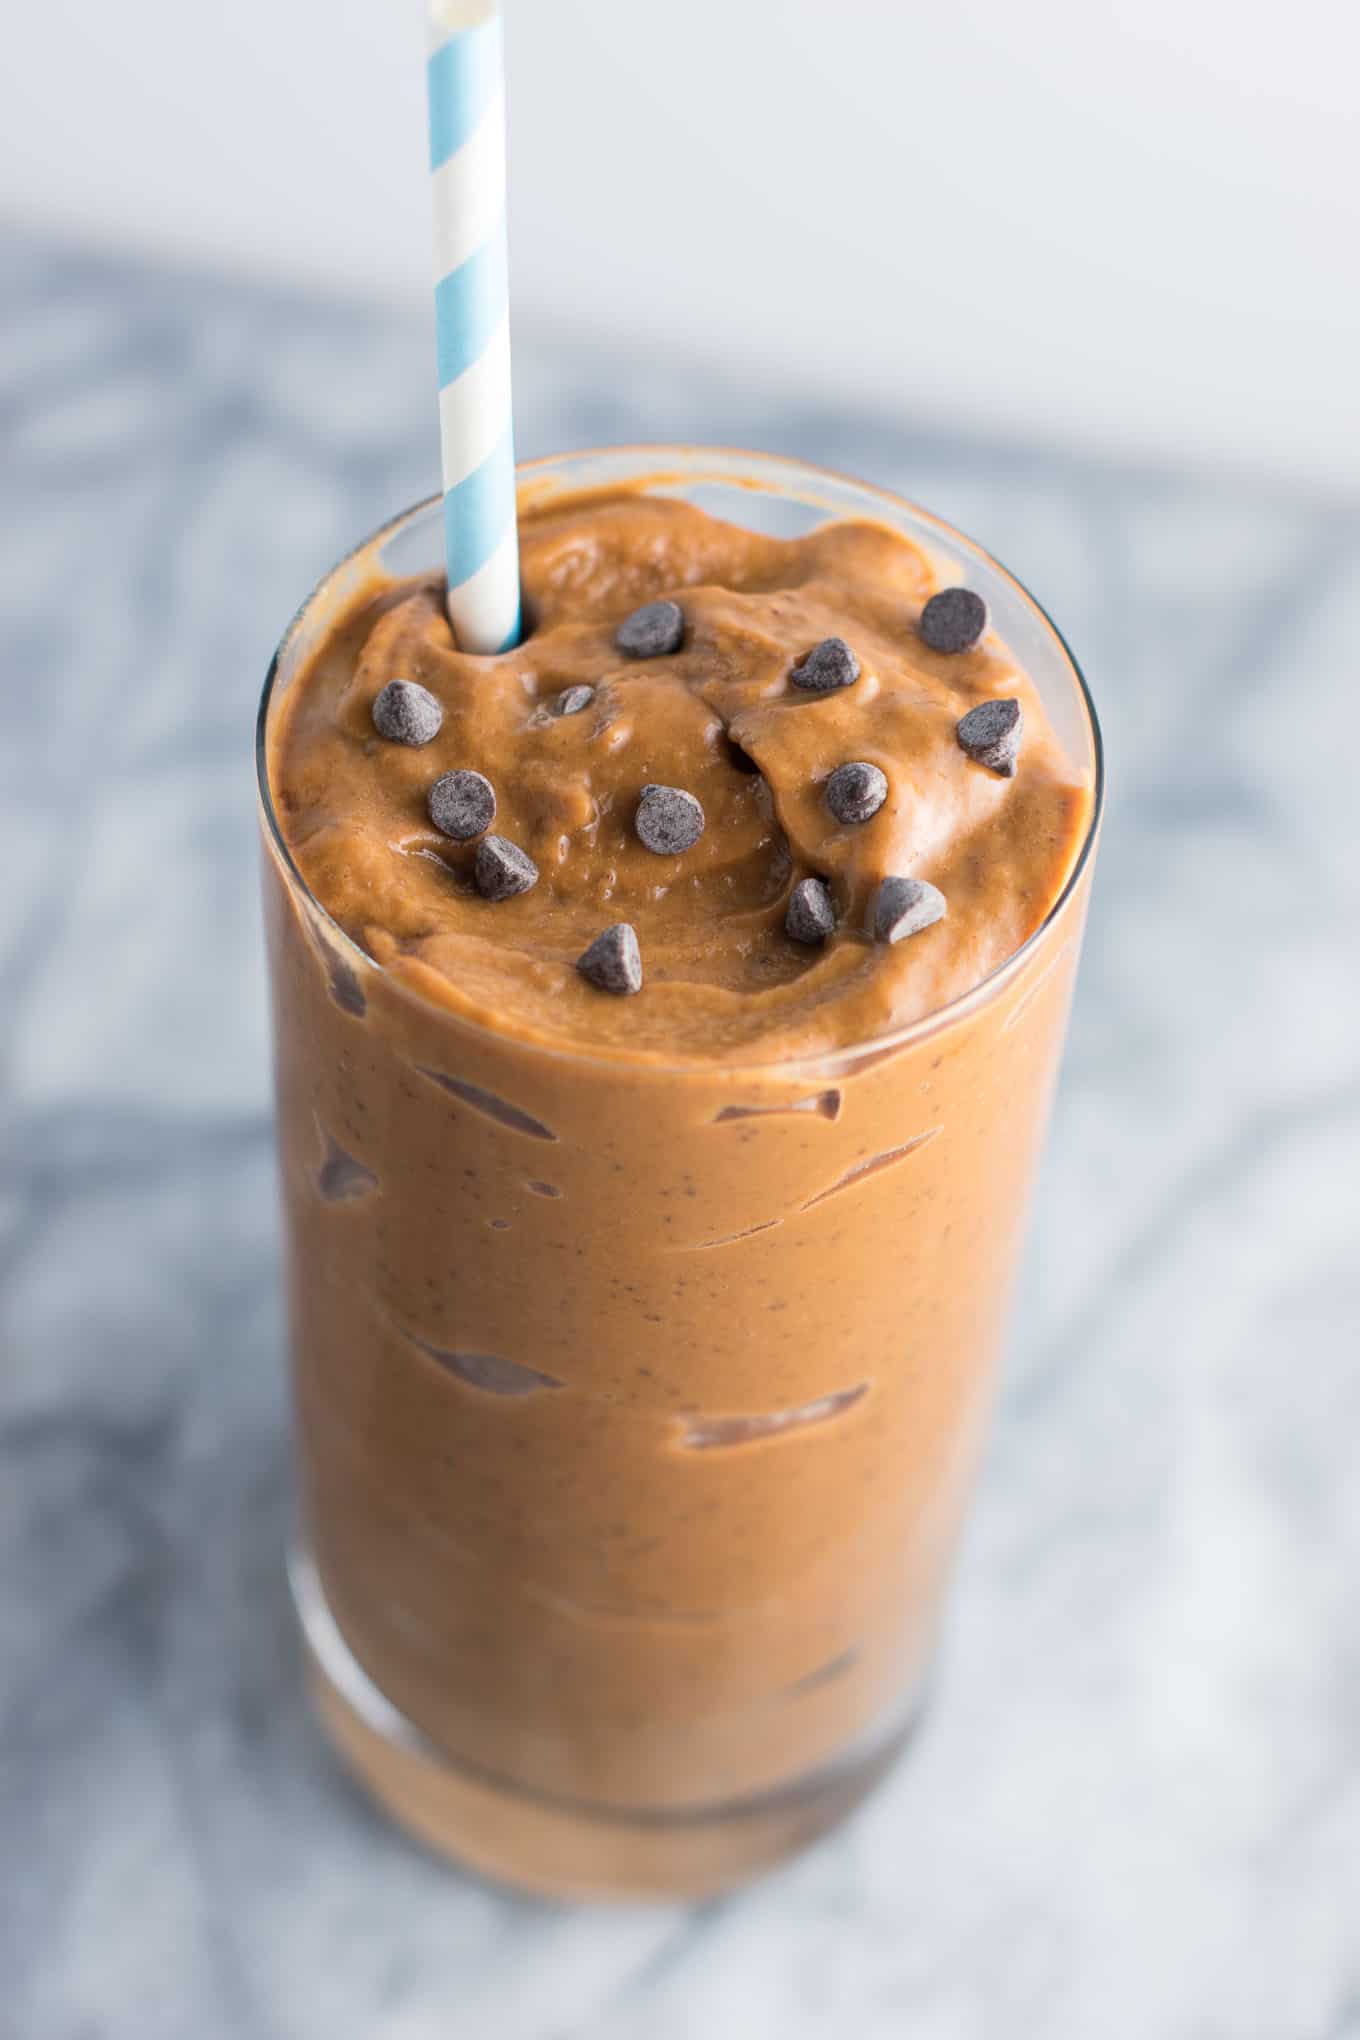 Healthy chocolate milkshake recipe made with just 5 ingredients. You won't believe the secret ingredient that makes it so creamy!